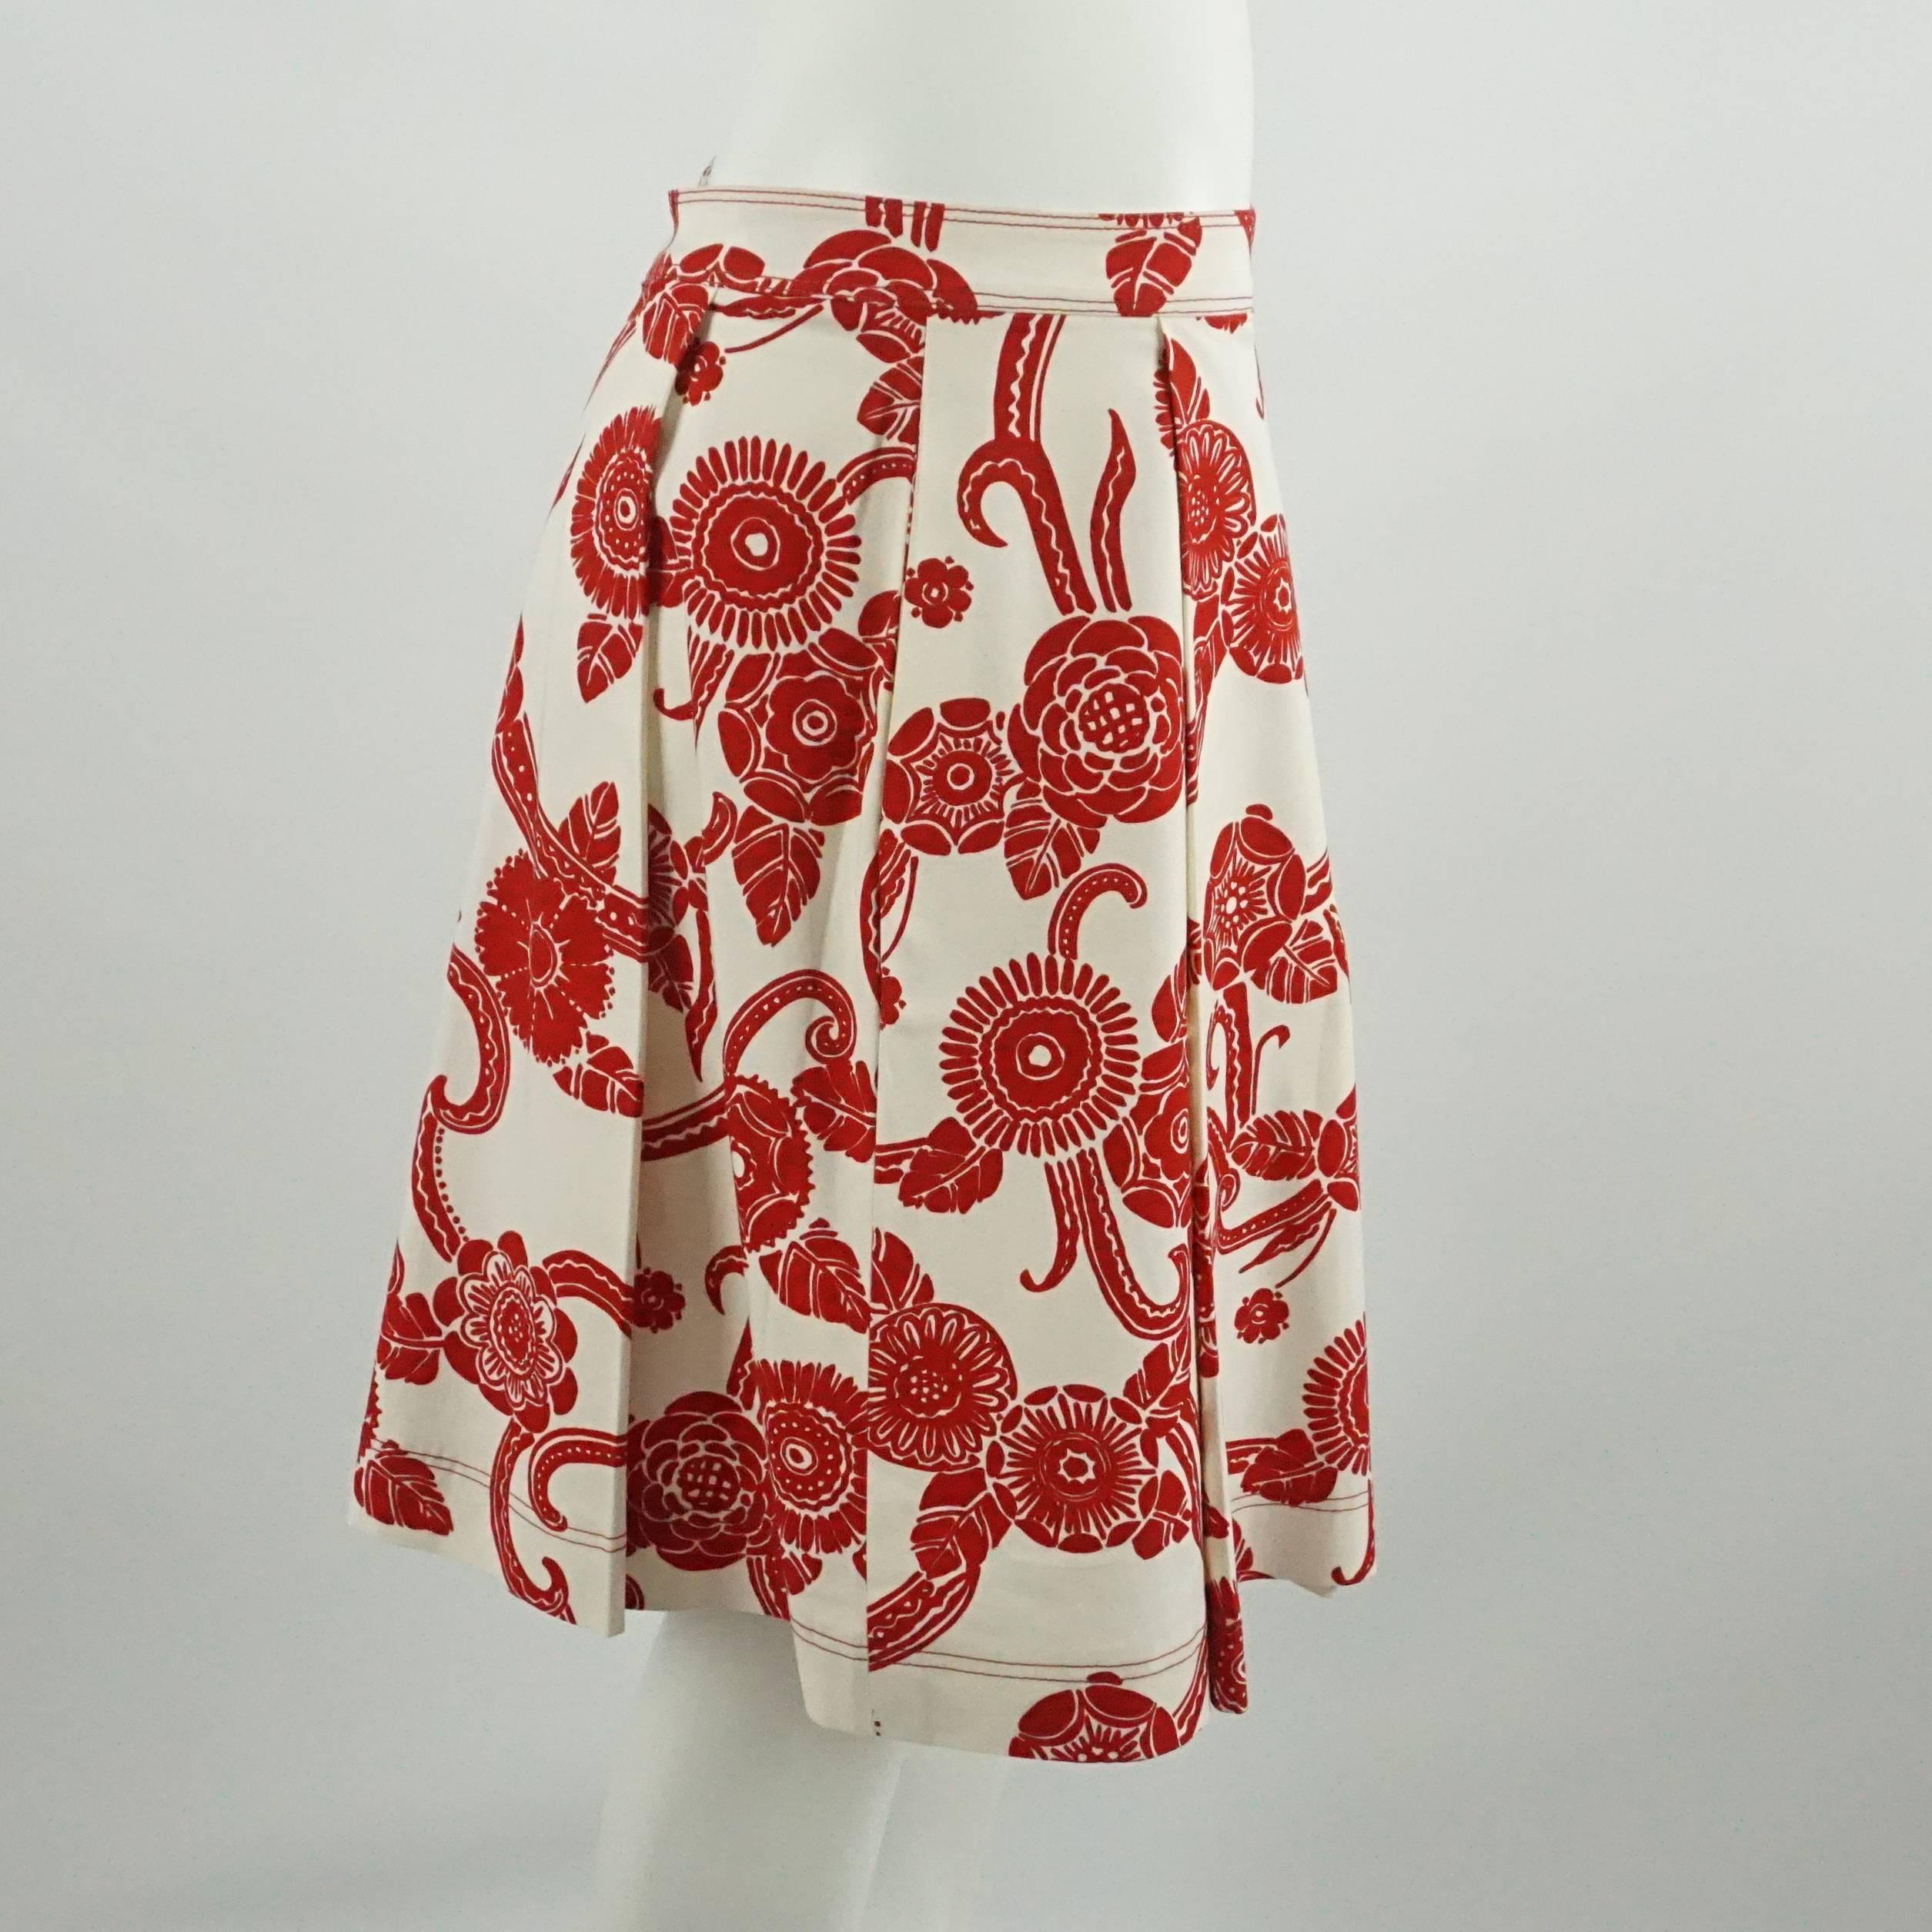 This Oscar de la Renta skirt is white cotton with a red design. It has some pleating and red stitching. This skirt is in very good condition and has some minor staining and loose threads.

Measurements
Waist: 32